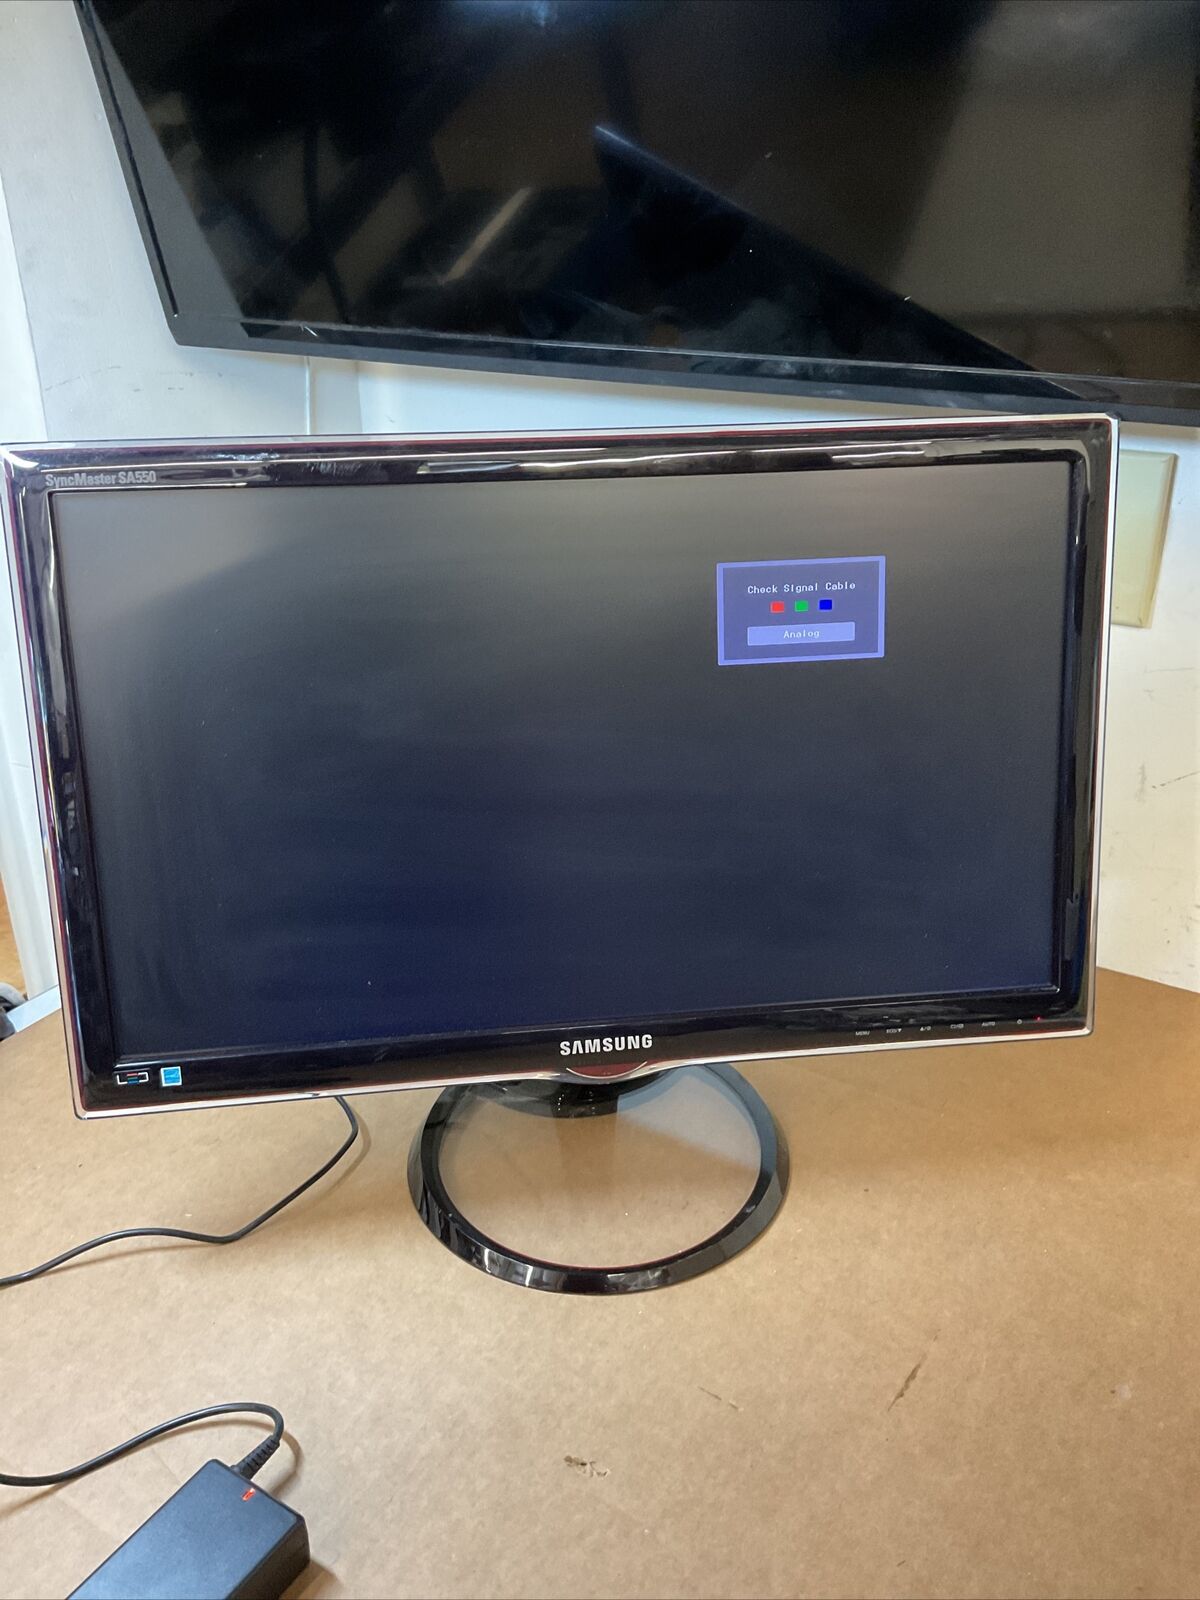 Samsung S23A550H 23-Inch syncMaster 1920x1080 HD LED HDMI Computer Monitor